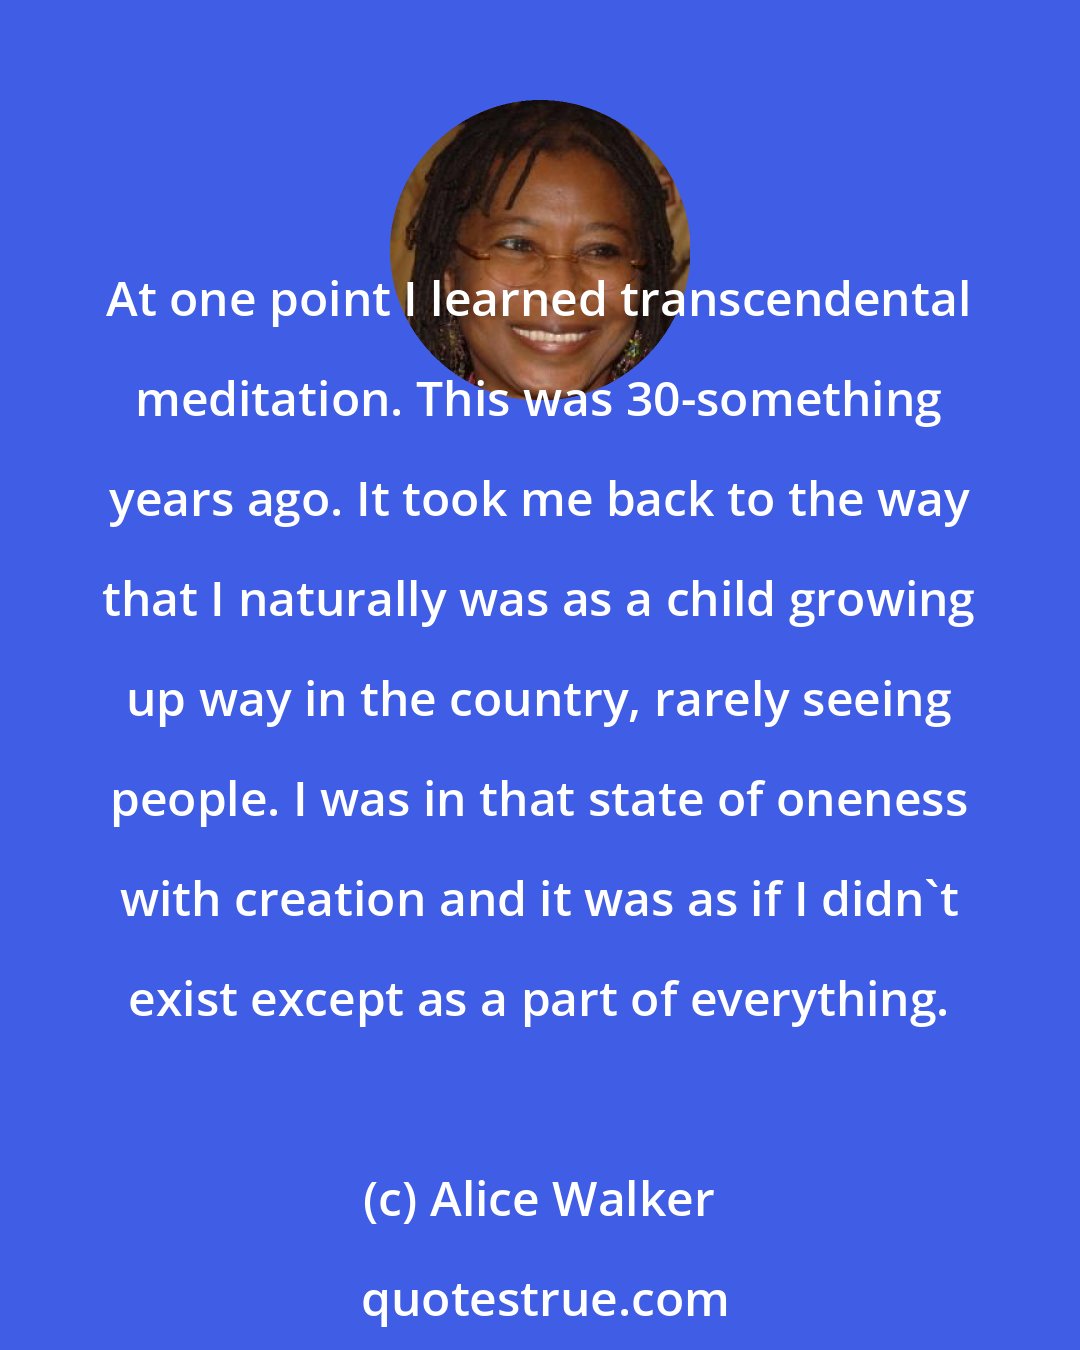 Alice Walker: At one point I learned transcendental meditation. This was 30-something years ago. It took me back to the way that I naturally was as a child growing up way in the country, rarely seeing people. I was in that state of oneness with creation and it was as if I didn't exist except as a part of everything.